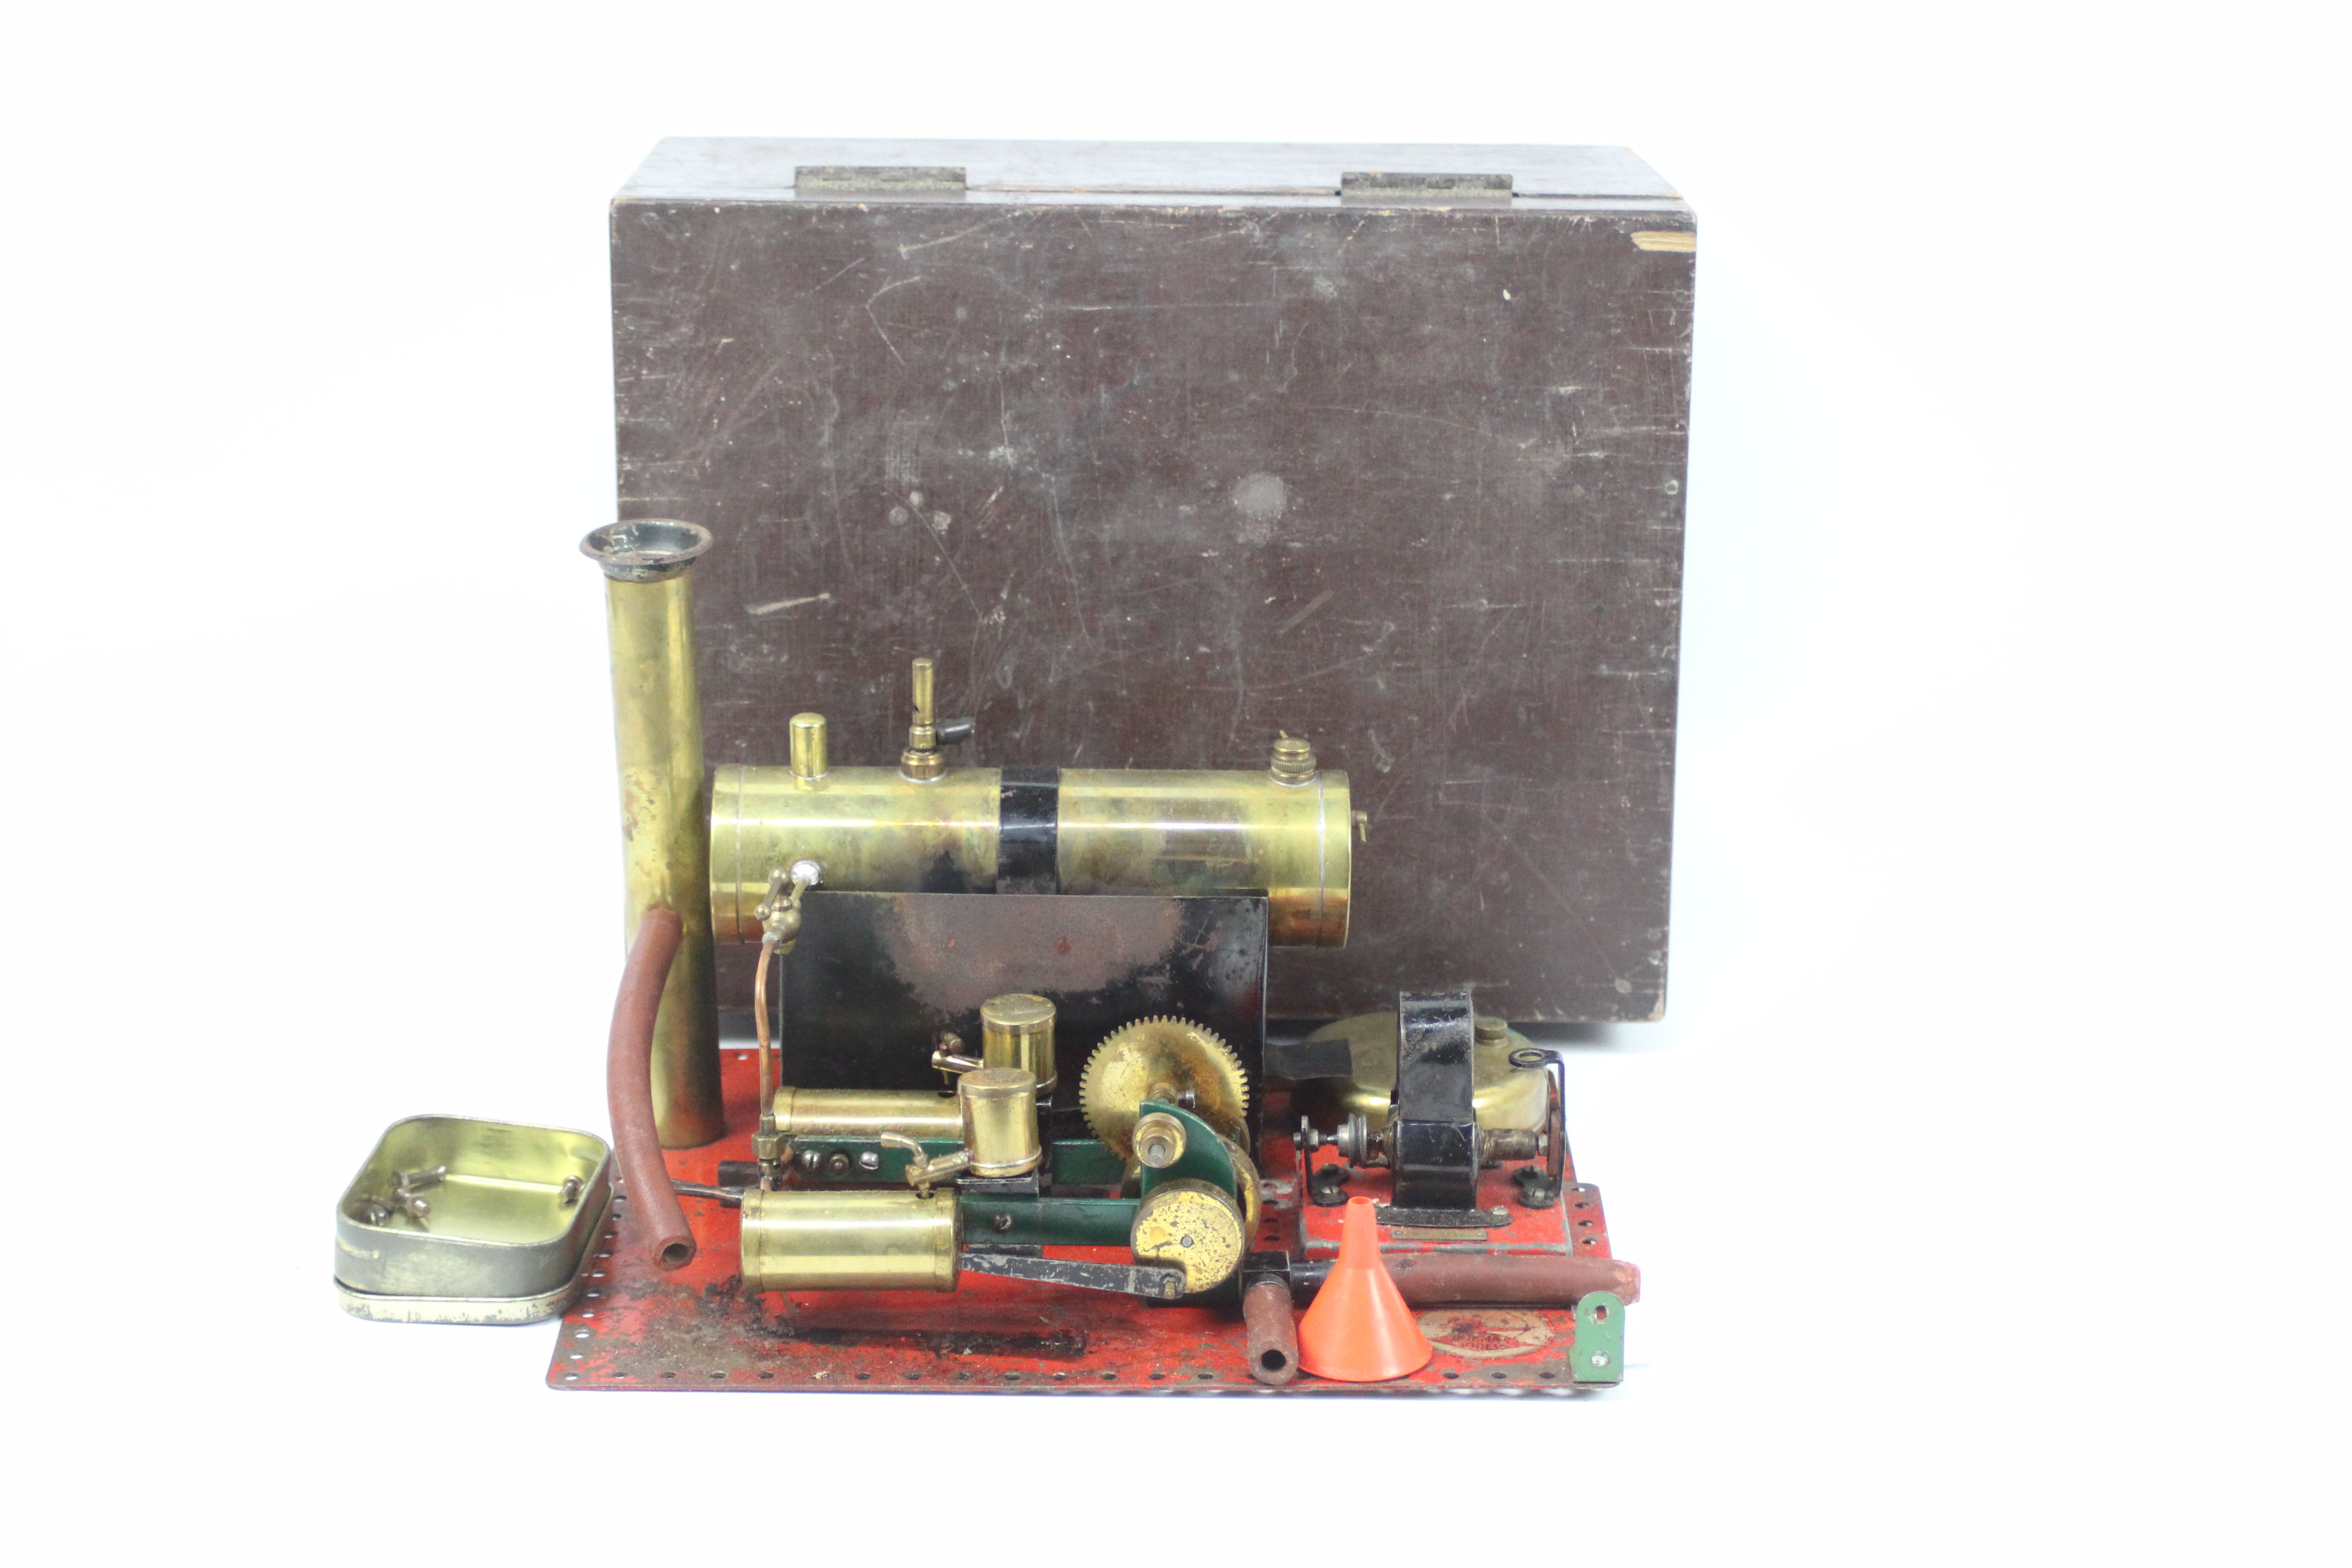 Bowman - A vintage Bowman twin cylinder stationary steam engine which also comes with a 2 volt